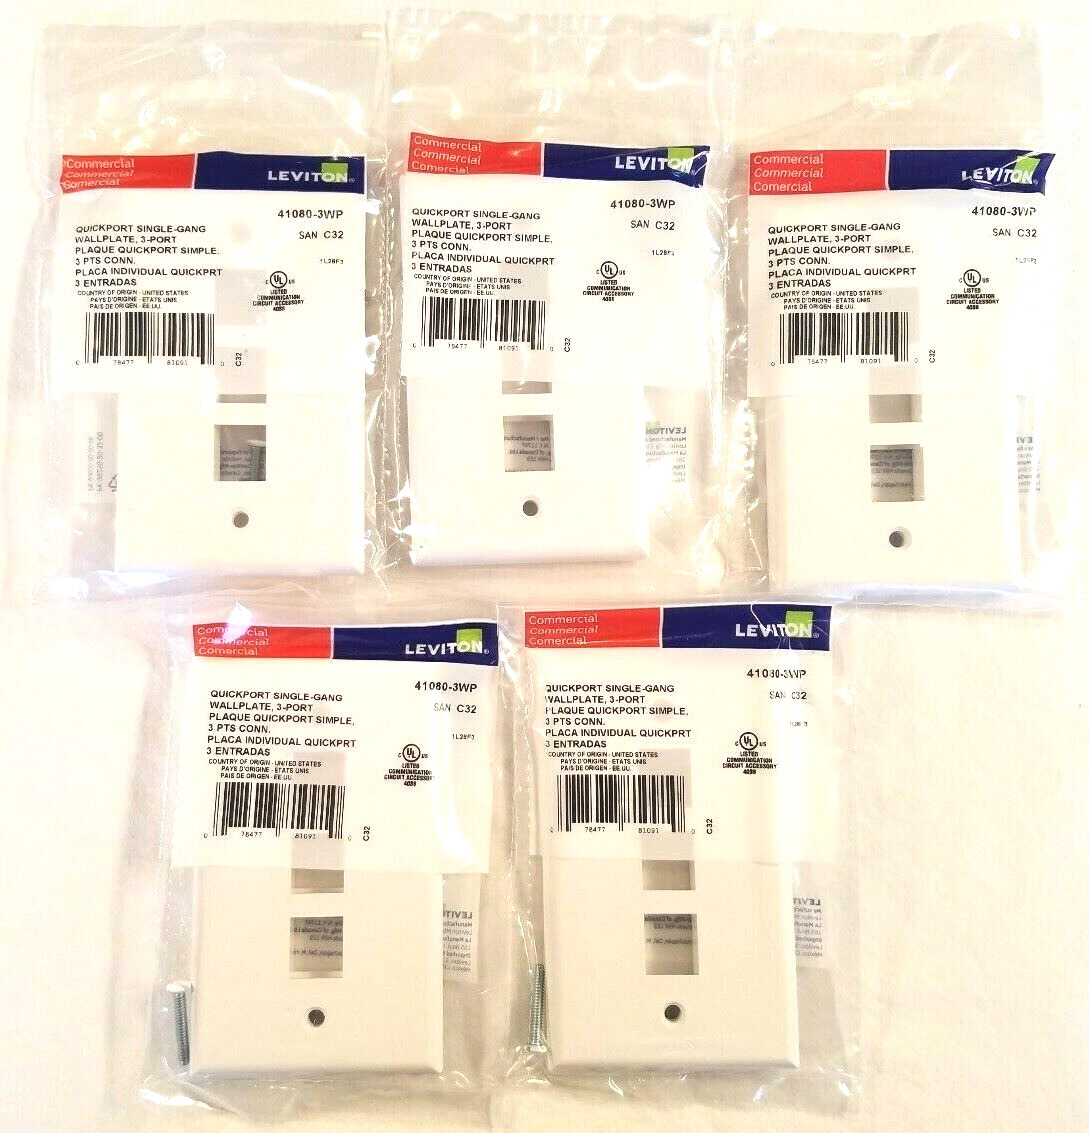 41080-3WP 3-Port Leviton Single-Gang QuickPort Wallplate, White - 5 PACK